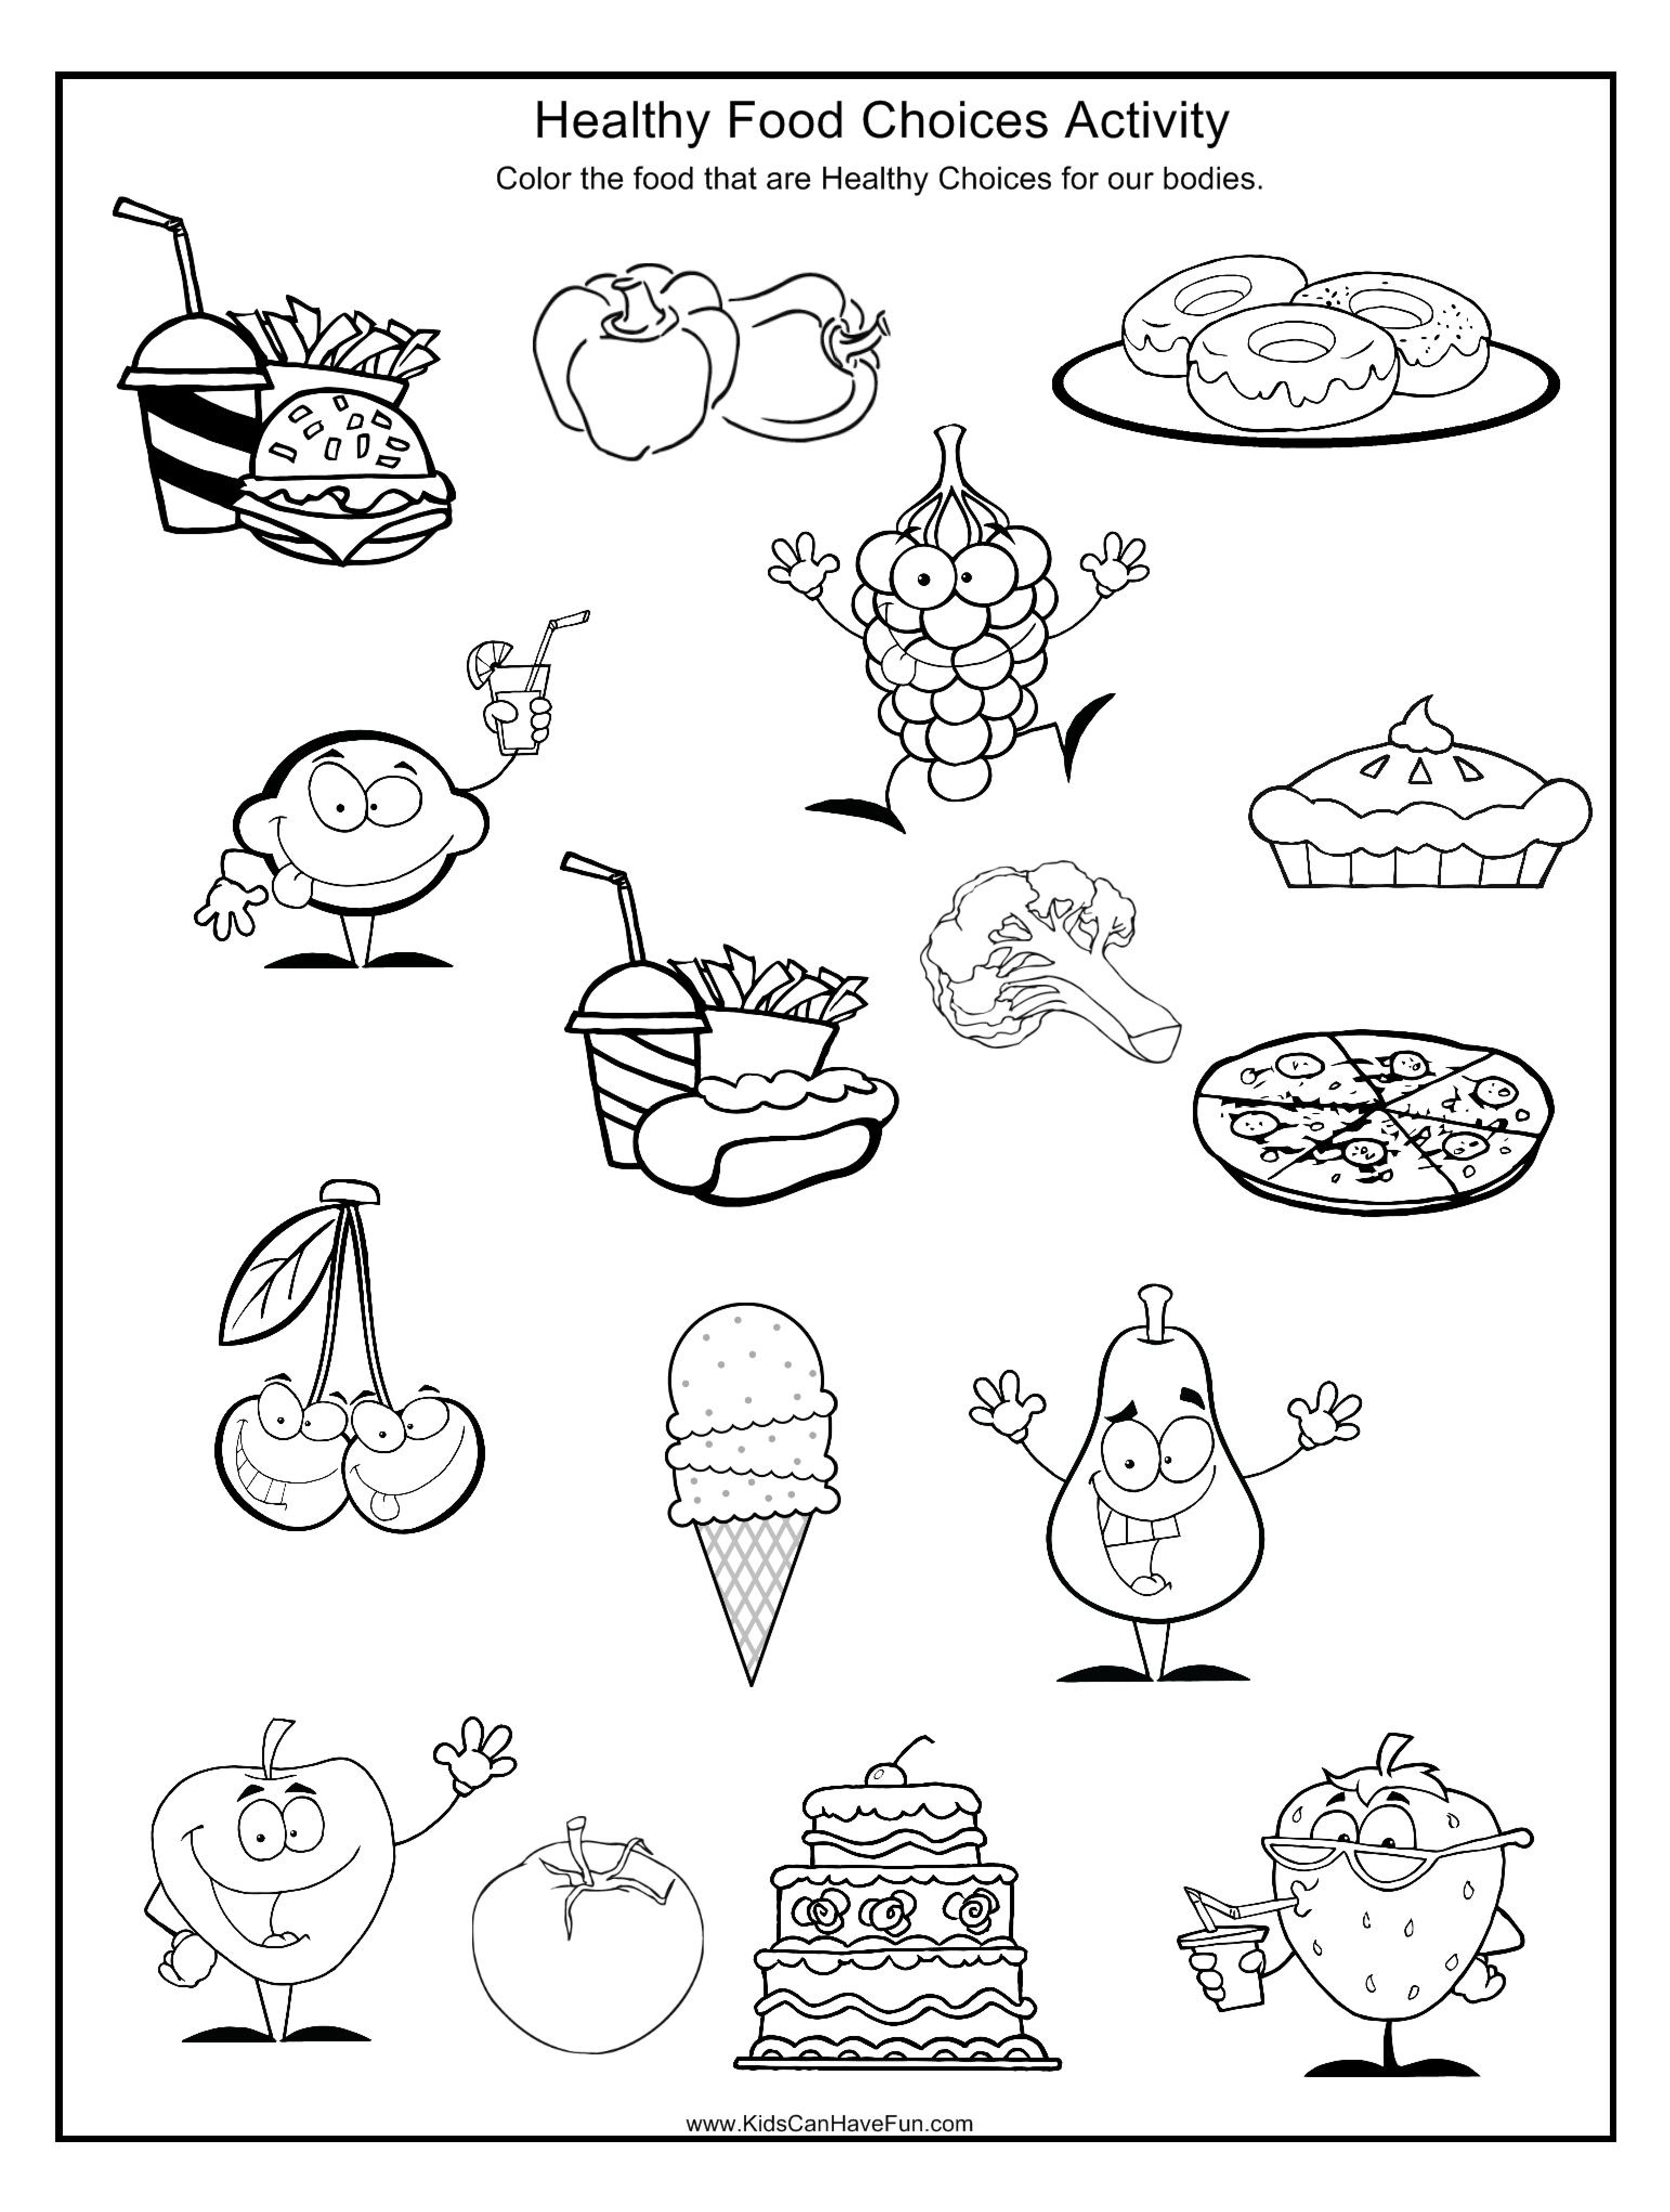 Pindebbie Yoho On Coloring Sheets | Pinterest | Healthy And - Free Printable Healthy Eating Worksheets